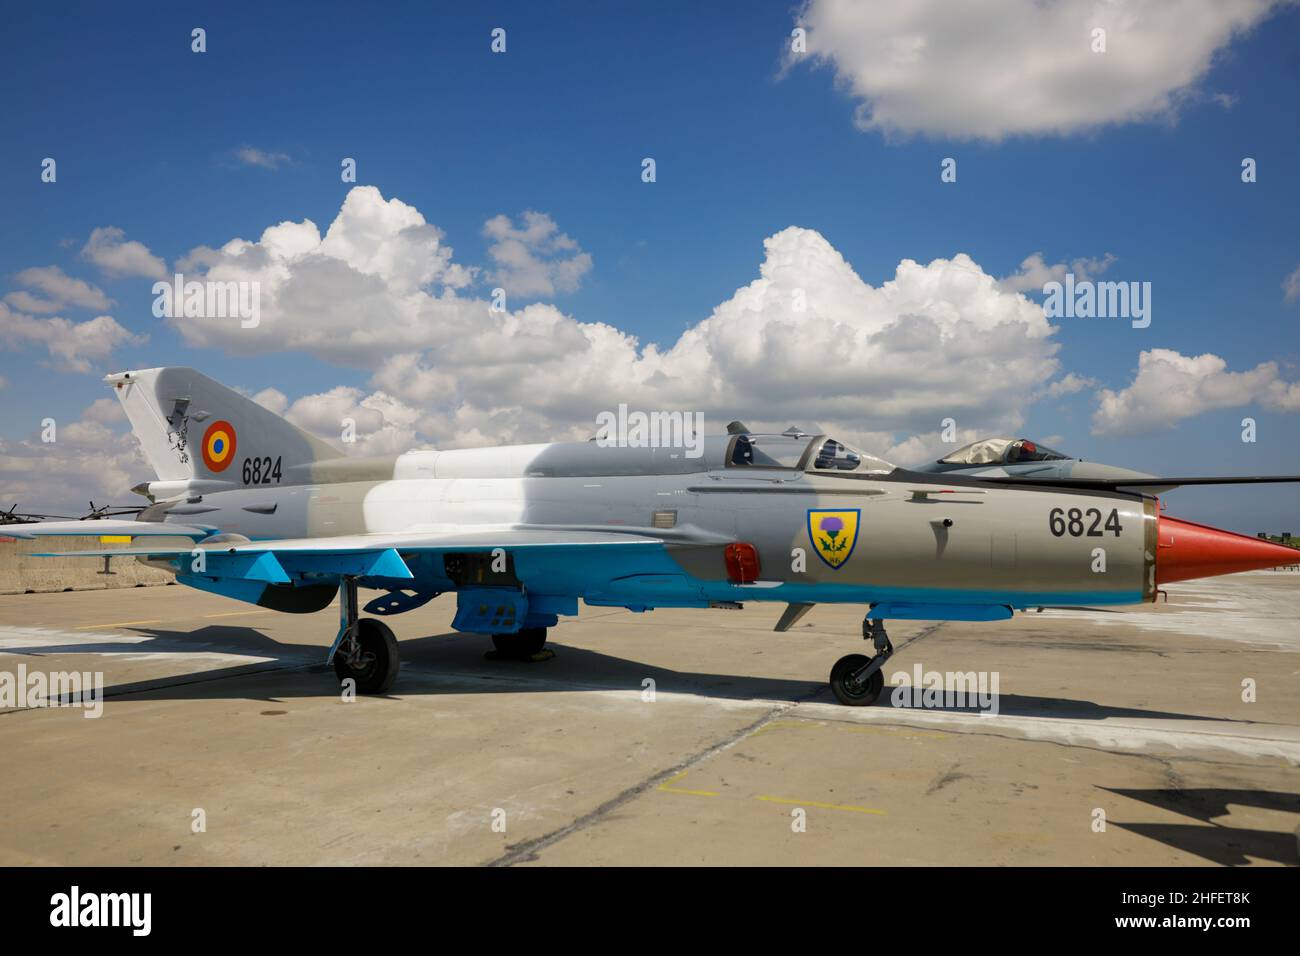 Mihail Kogalniceanu, Romania - July 2, 2021: Romanian Air Force  Mikoyan-Gurevich MiG-21 Lancer supersonic jet fighter on display at an air policing e Stock Photo